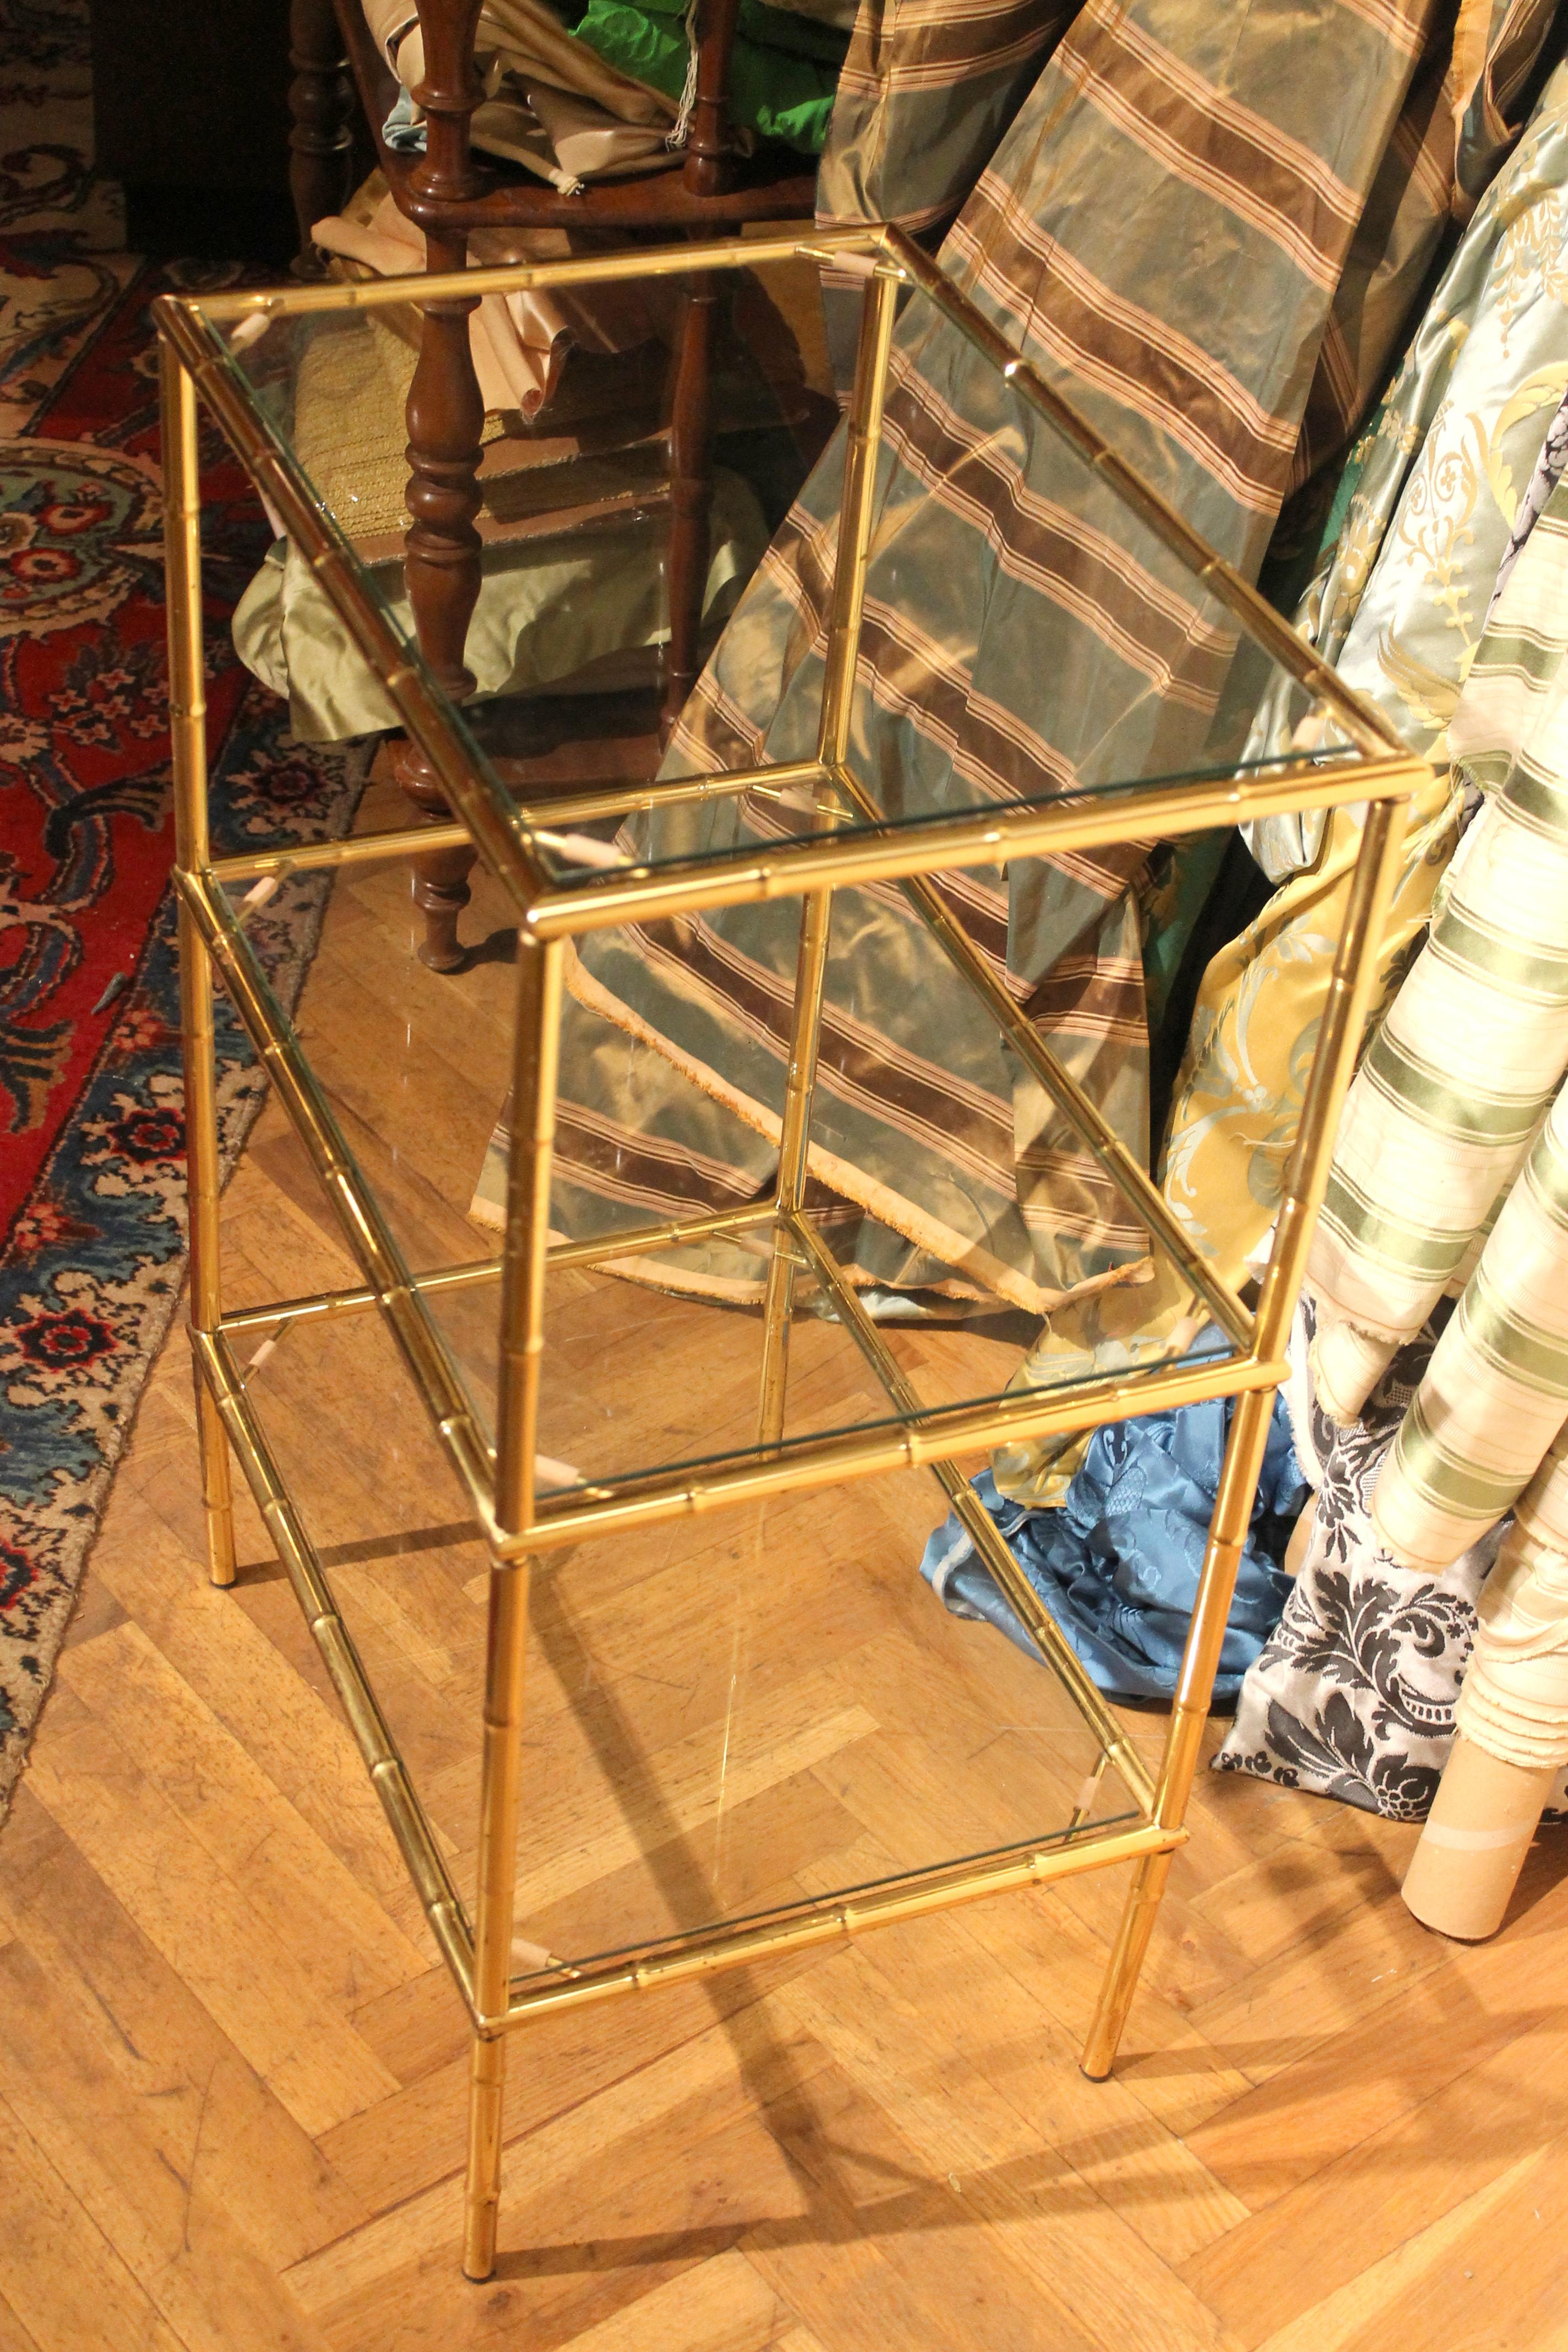 Add a touch of European glamour to your home with this stylish gilt metal three-tiered table in the style of the Maison Baguès.
This French Mid-Century Modern étagère, crafted with popular faux bamboo motif, features clean lines and a modern,